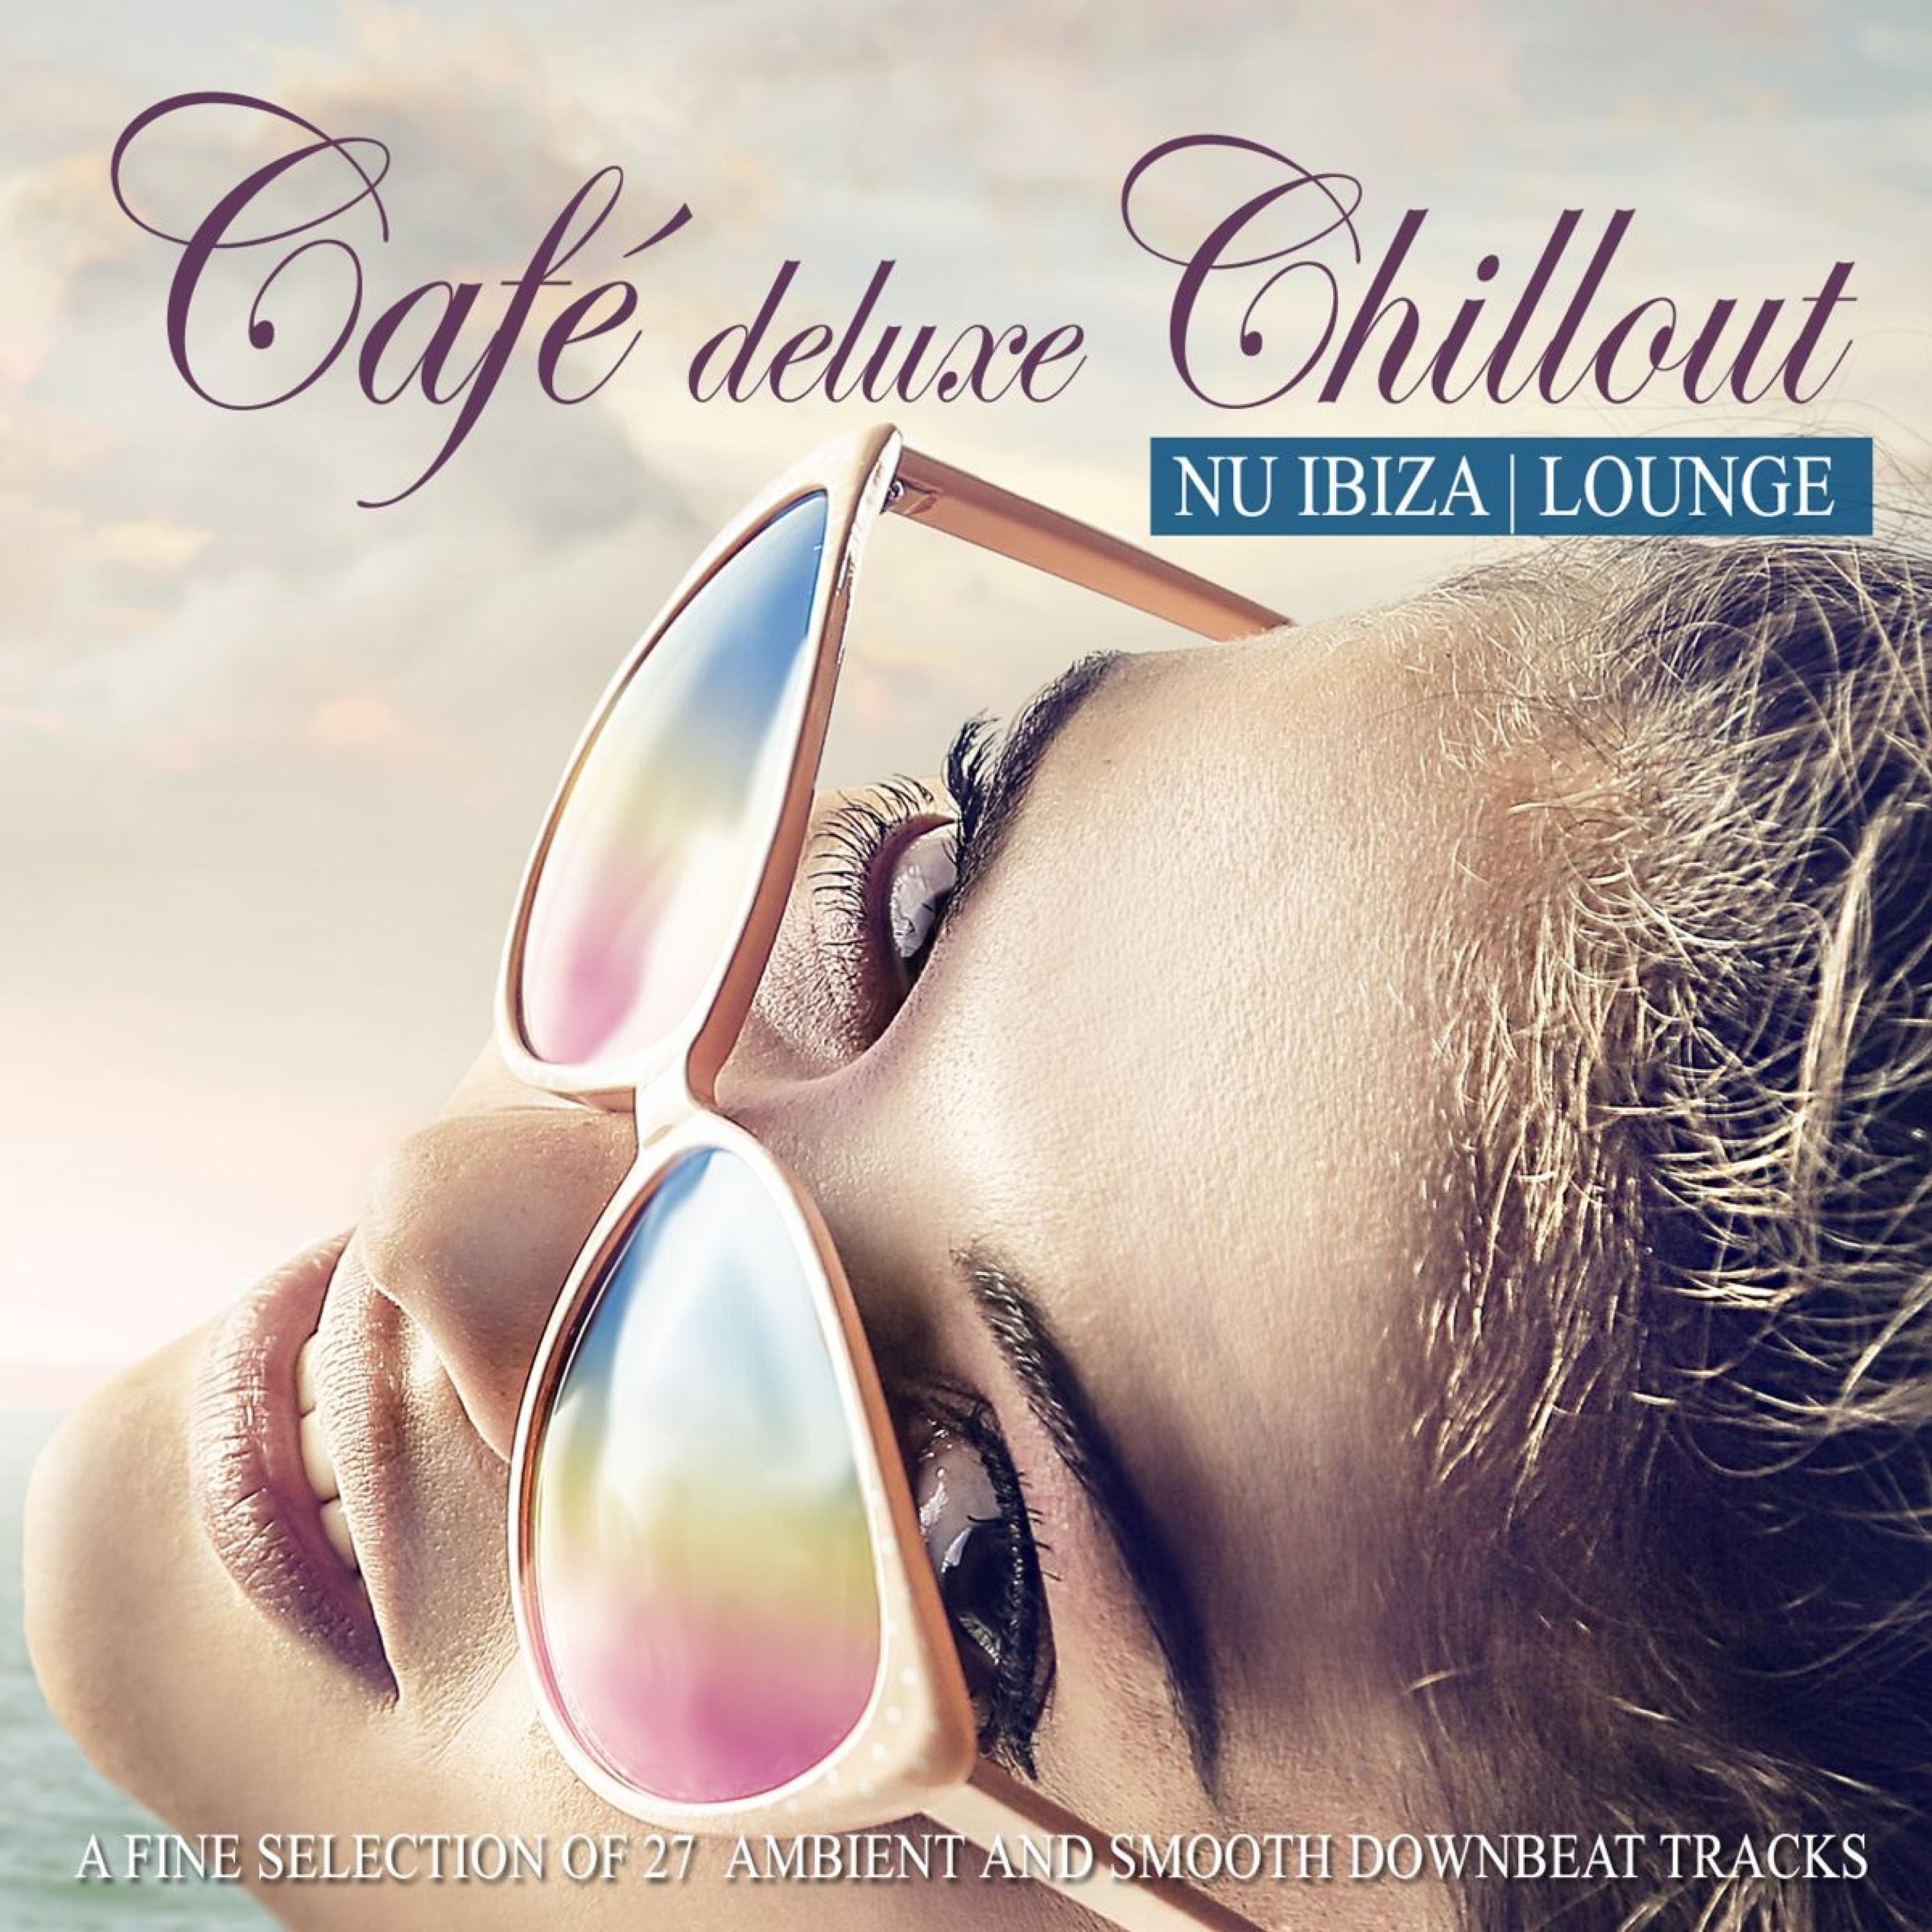 Cafe Deluxe Chillout Nu Ibiza Lounge A Fine Selection of 27 Ambient and Smooth Downbeat Tracks